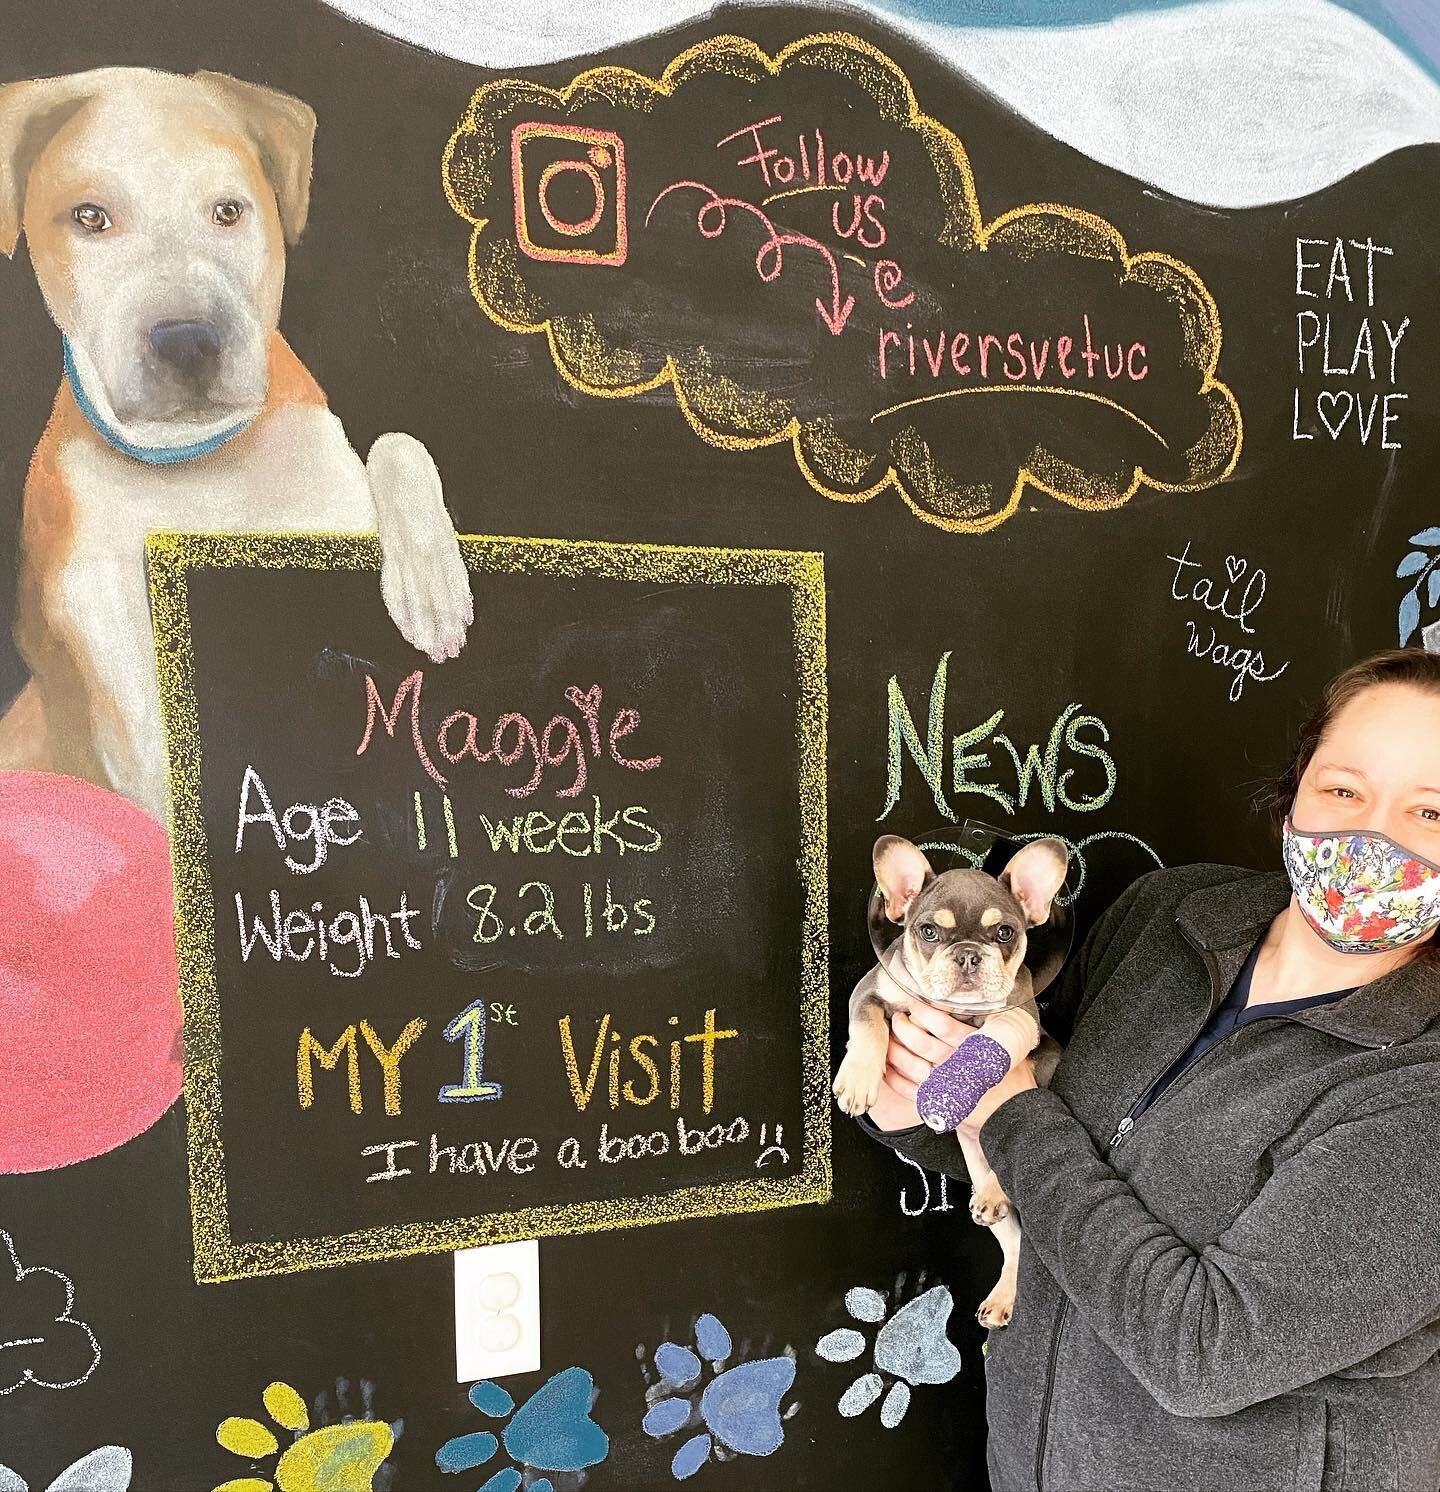 Maggie&rsquo;s first visit was for a torn toe nail... but she still gave us all the hugs and kisses 🥰🐶🐾

#frenchiesofinstagram #frenchiepuppy #firstvisit #veterinarian #walkinclinic #southhillsvet #pittsburghvet #riversvet #rvuc #puppies